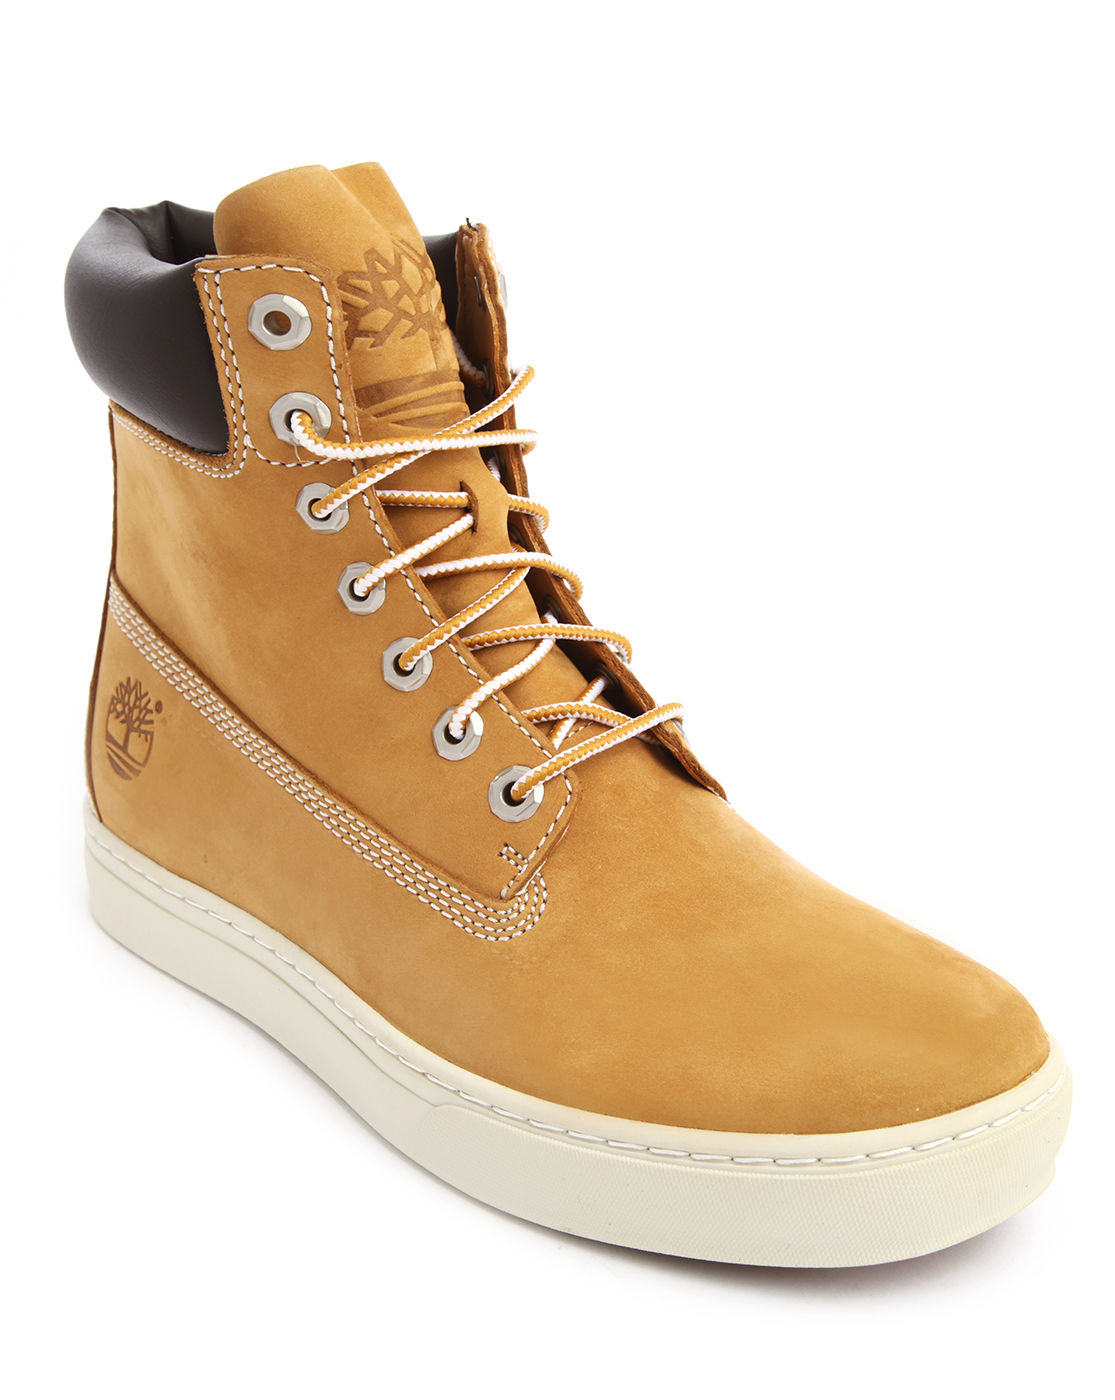 Timberland Newmarket 6 Inch Wheat Nubuck Leather Boots in Natural for ...